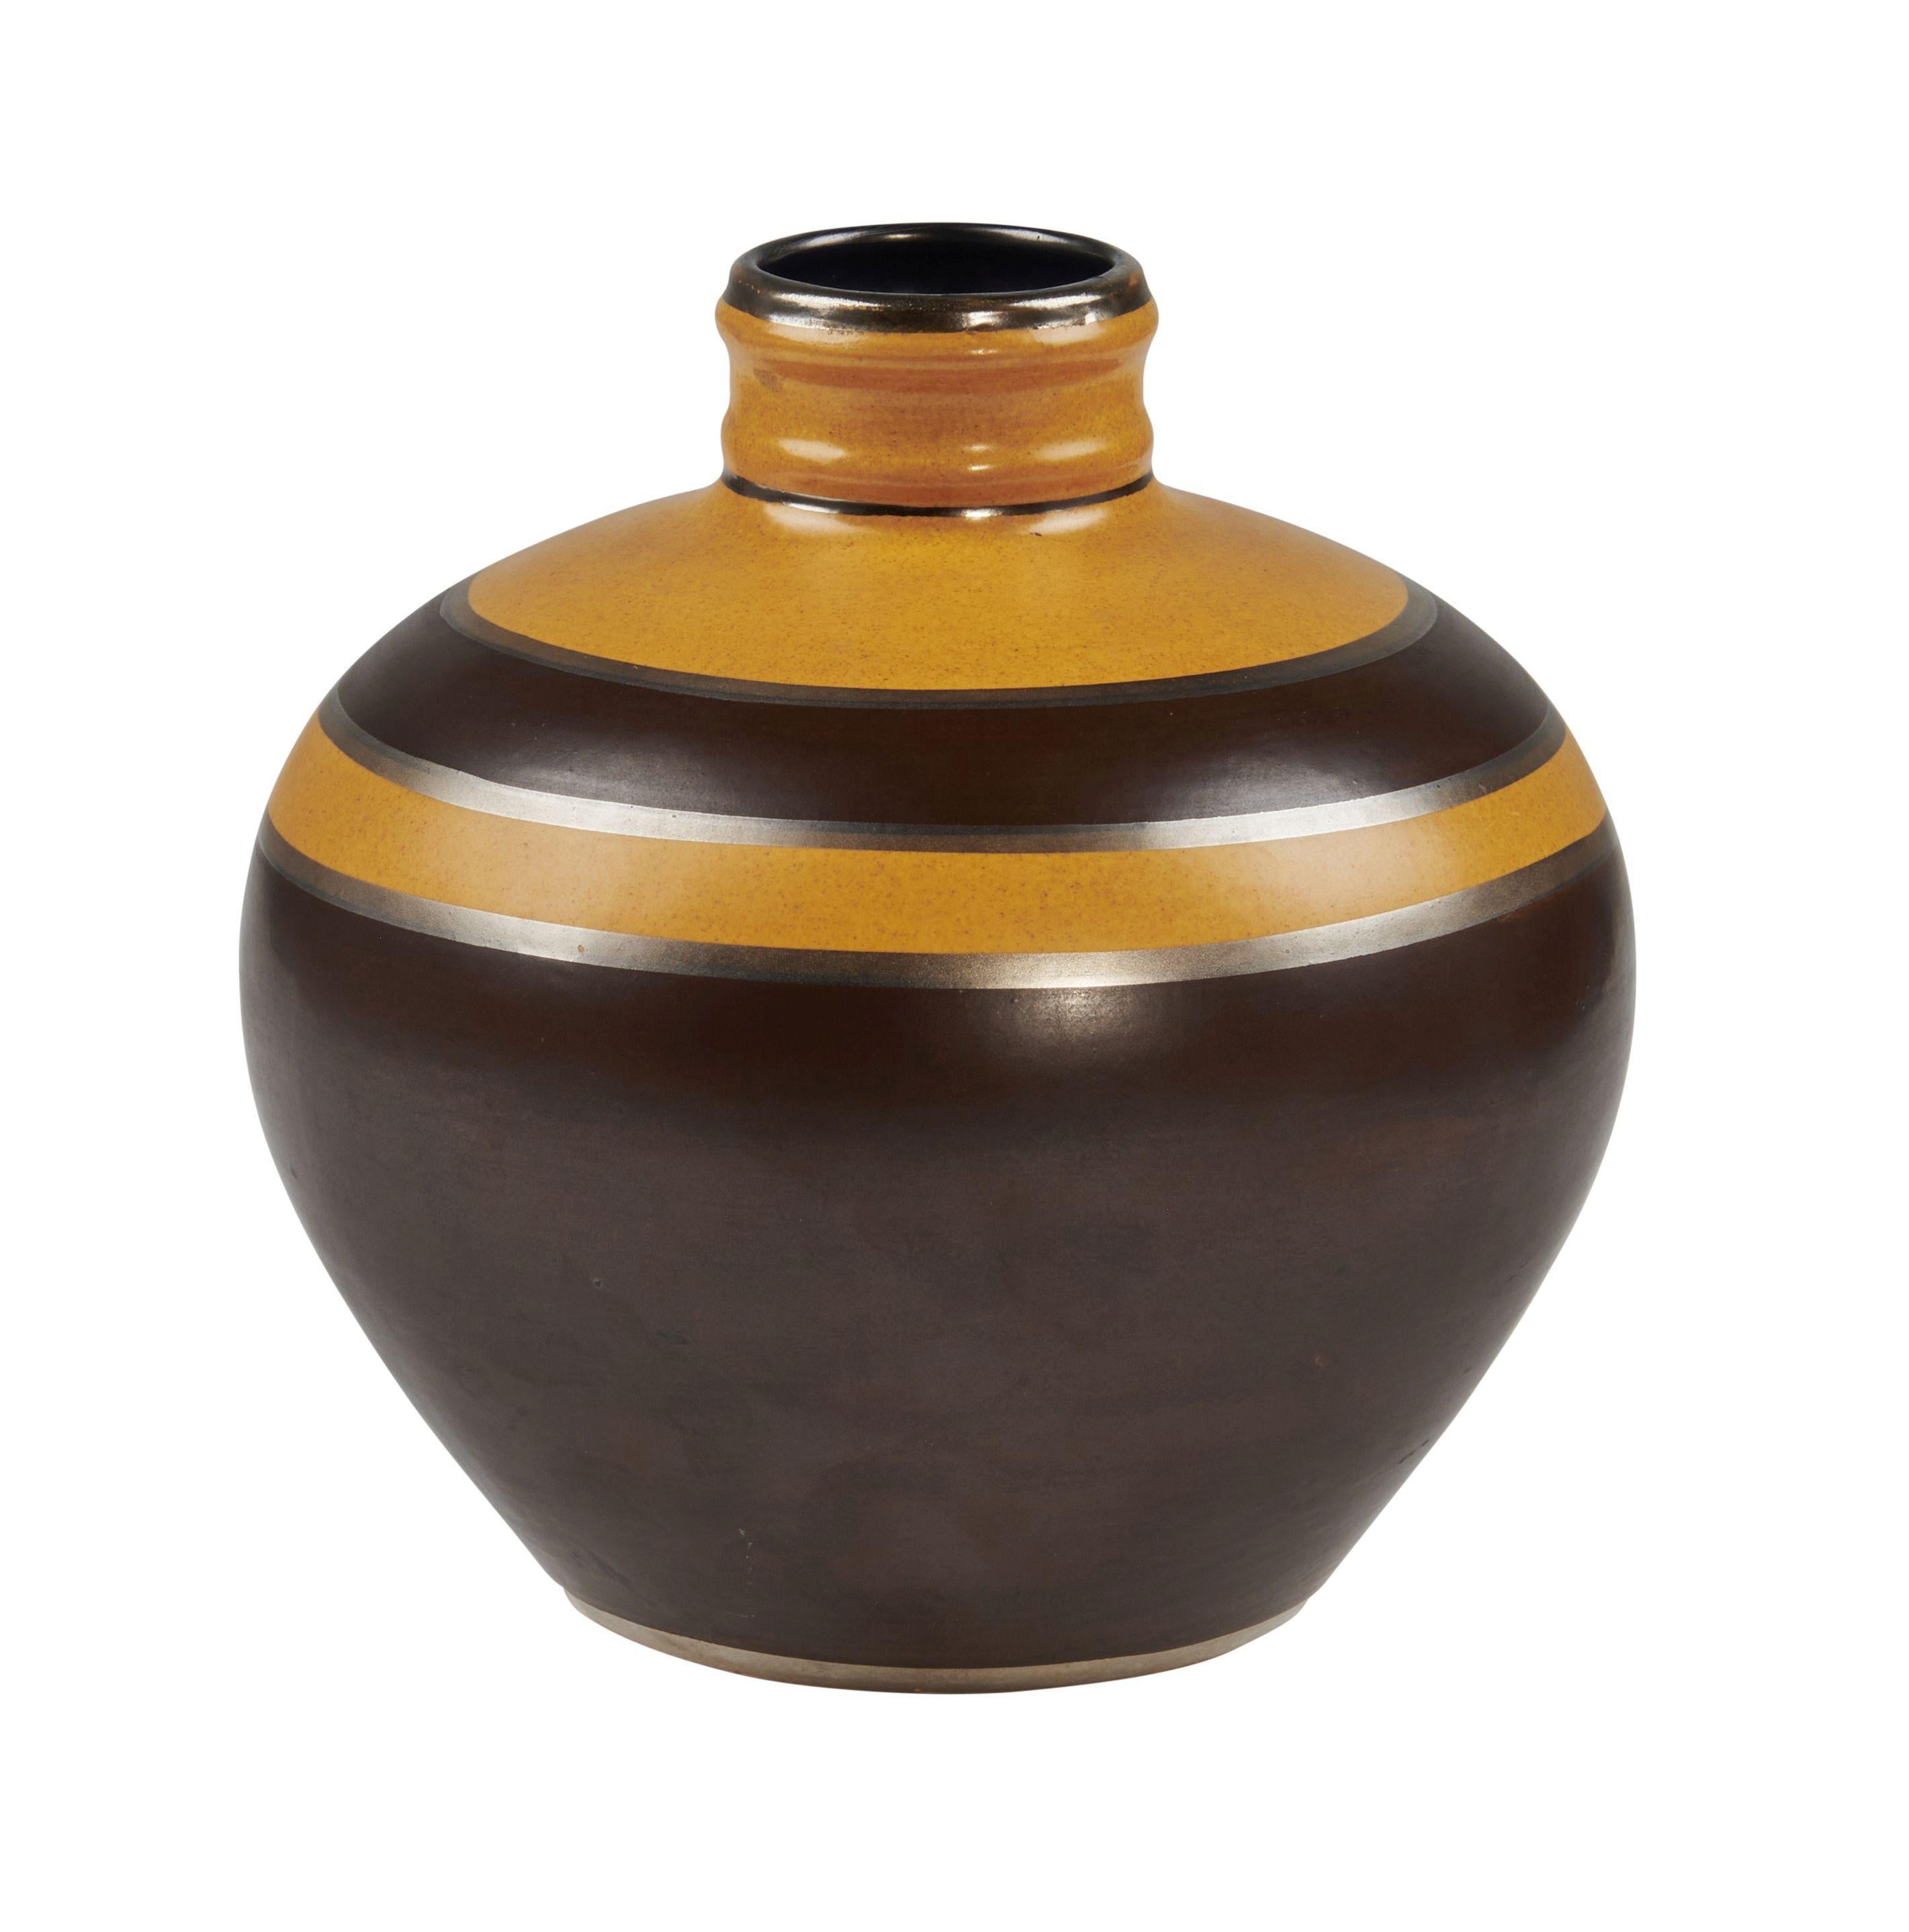 Boch Freres Keramis, Belgium. Rare Art Deco vase in glazed ceramics. Brown and orange glaze 1930s. Fine polychrome glazed earthenware in imitation of brassware
Stamped and numbered
Model number: D1818 -446
Featured in catalog raisonné #756